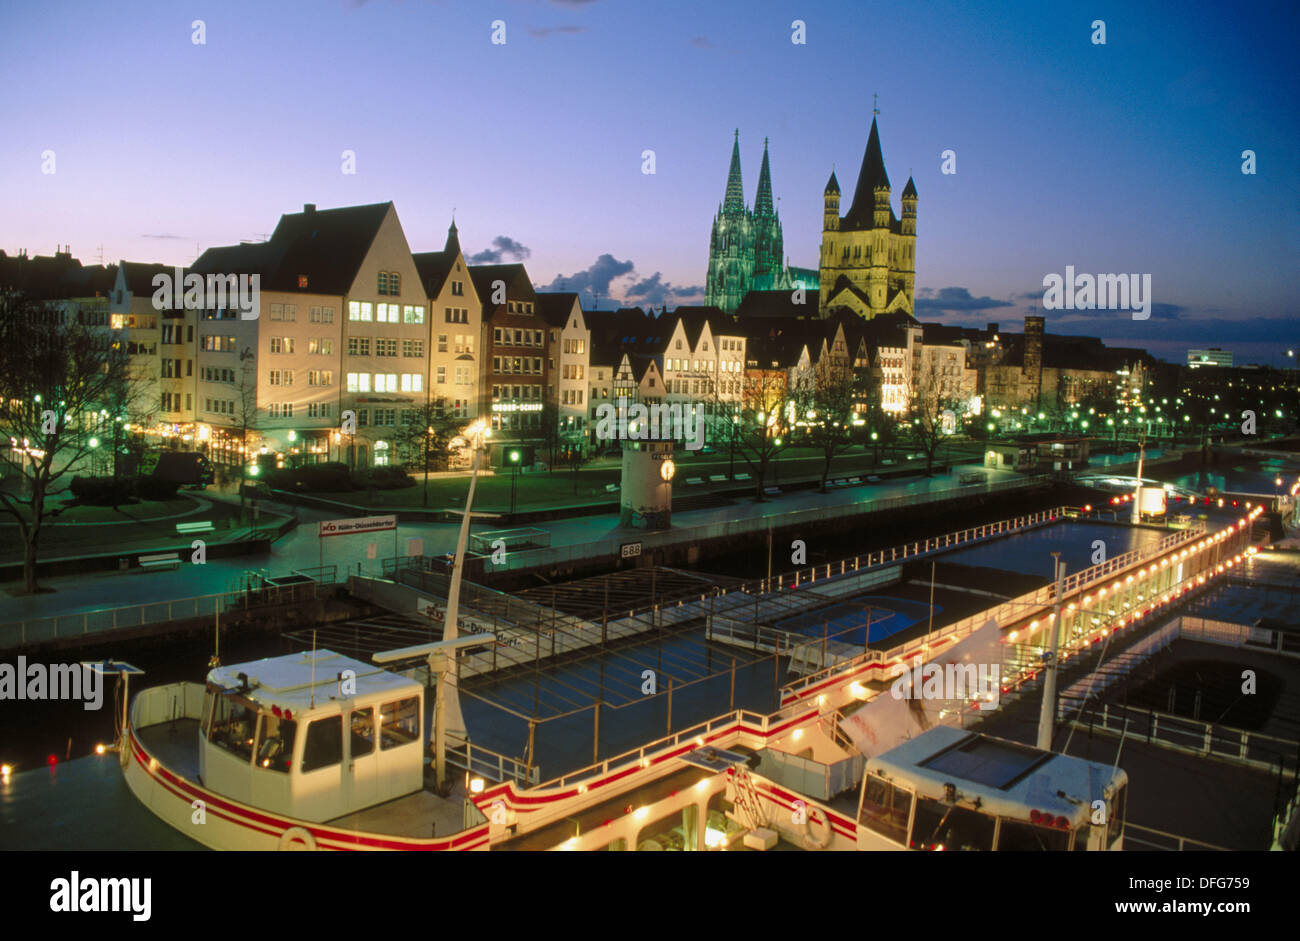 The Gross St. Martin and Rhine River. Cologne. Germany Stock Photo